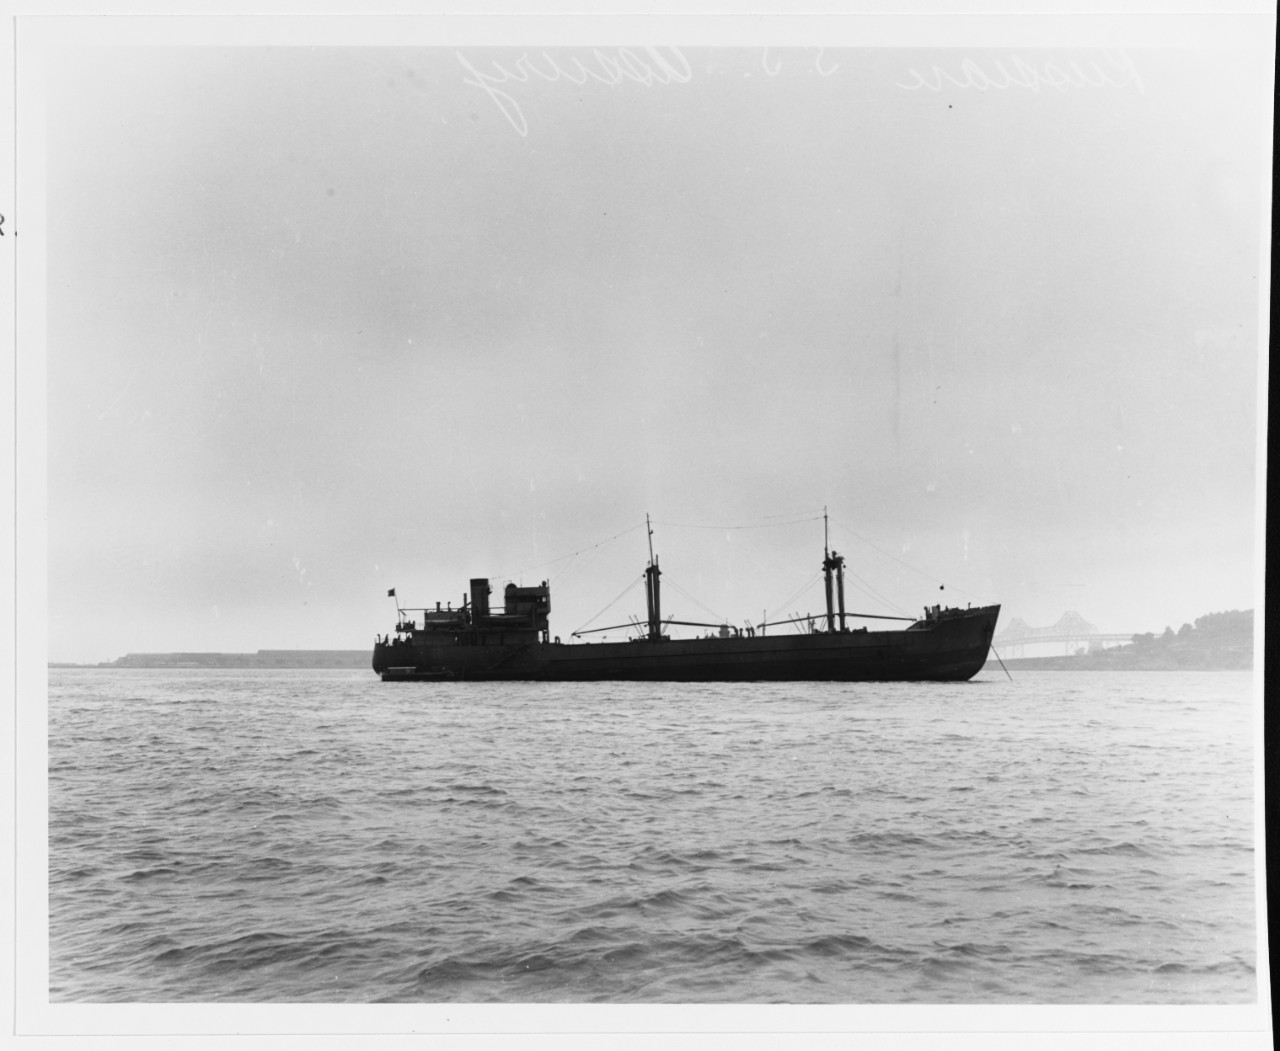 S.S. A. ANDREW (U.S.S.R. Merchant Cargo Ship, 1936-1966, under this name 1936-1962)